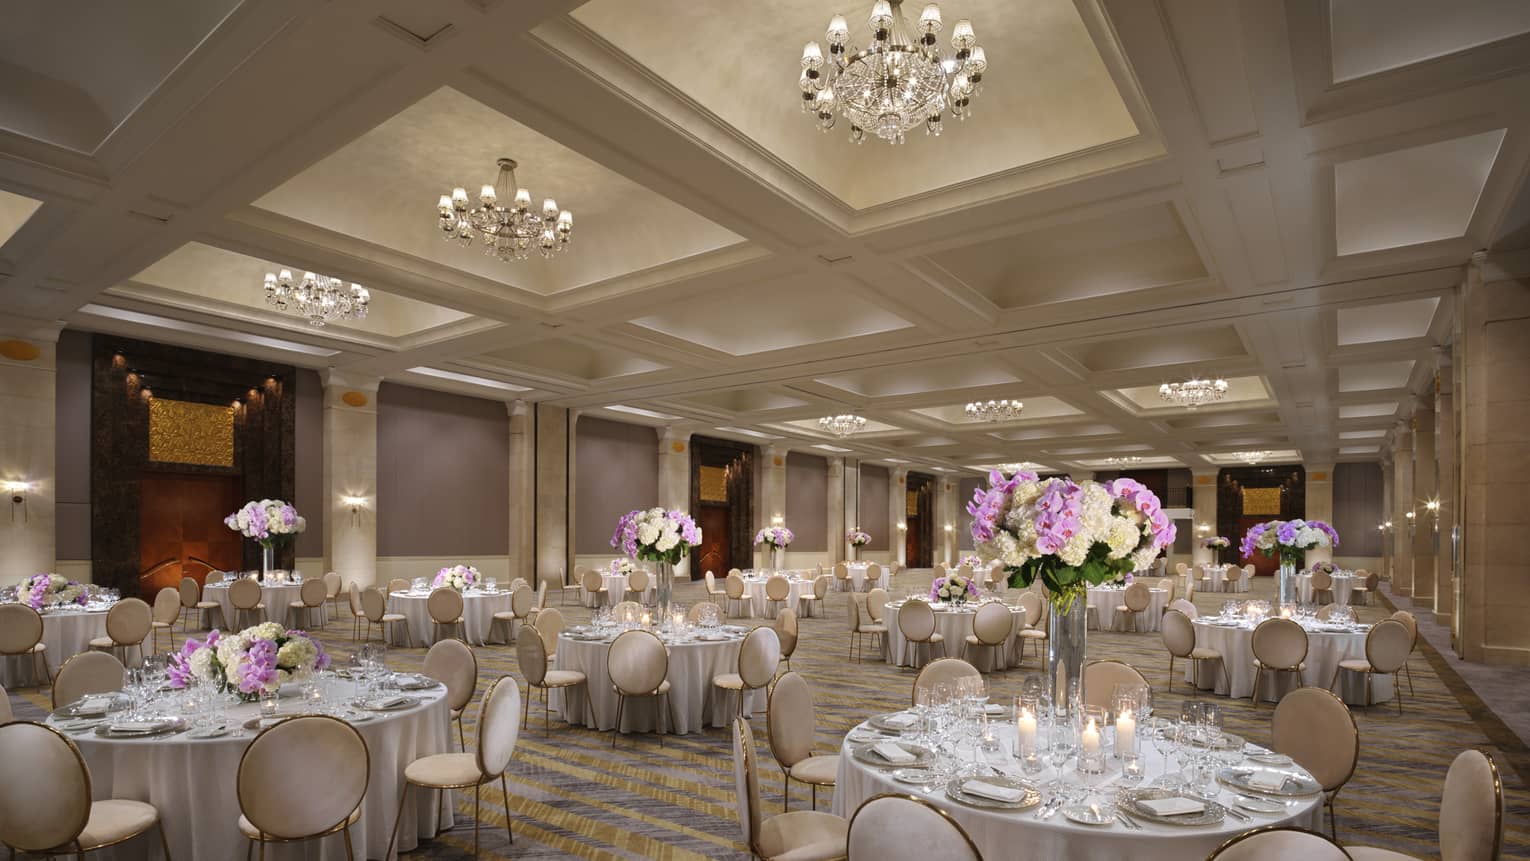 A chandelier-clad ballroom set with several circular tables boasting tall displays of hydrangeas. 